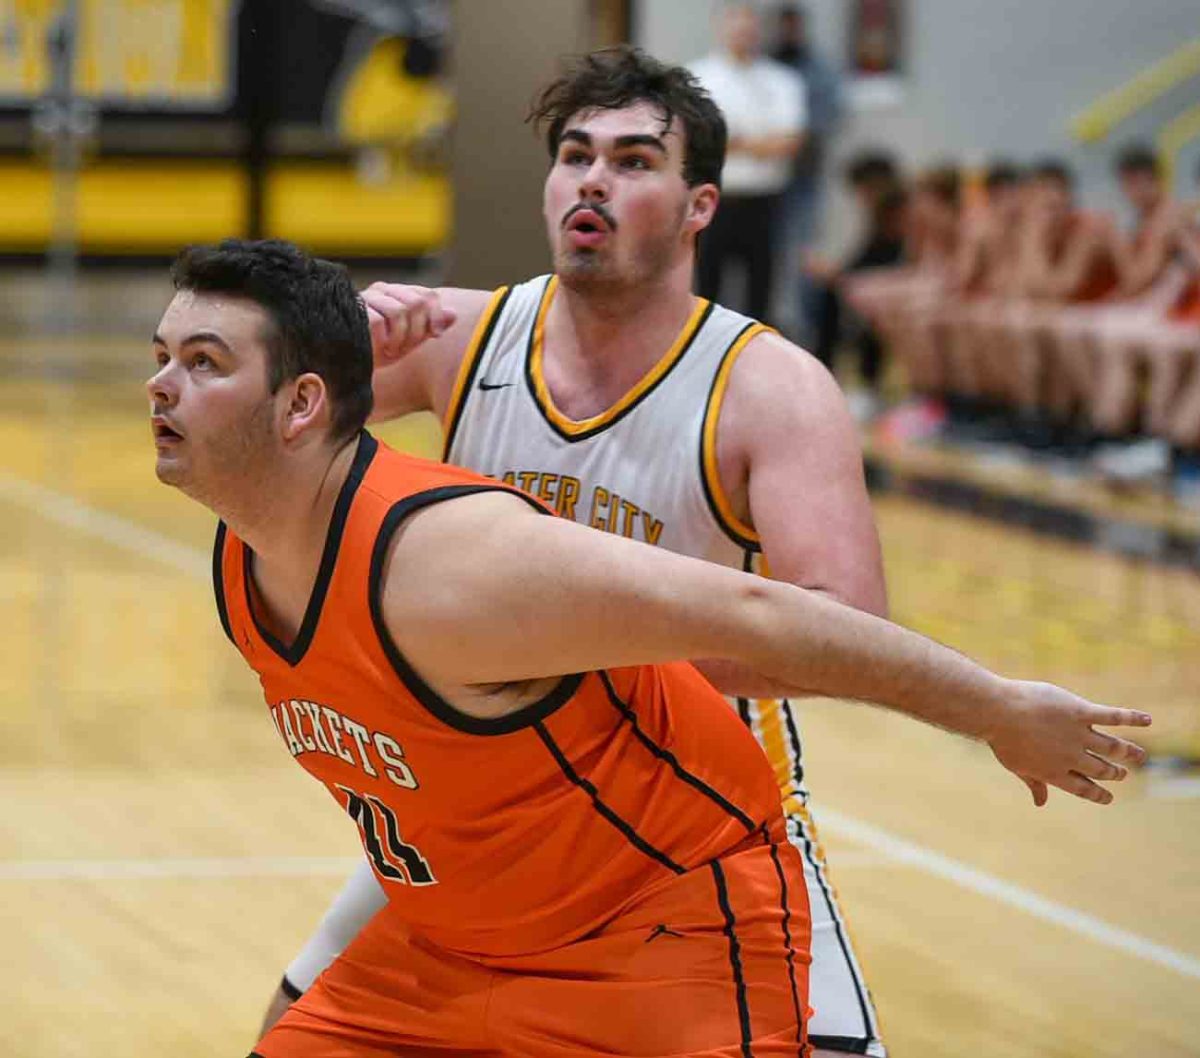 Middlesboro senior center Trey King battled for position on Tuesday during the Jackets win over Williamsburg.